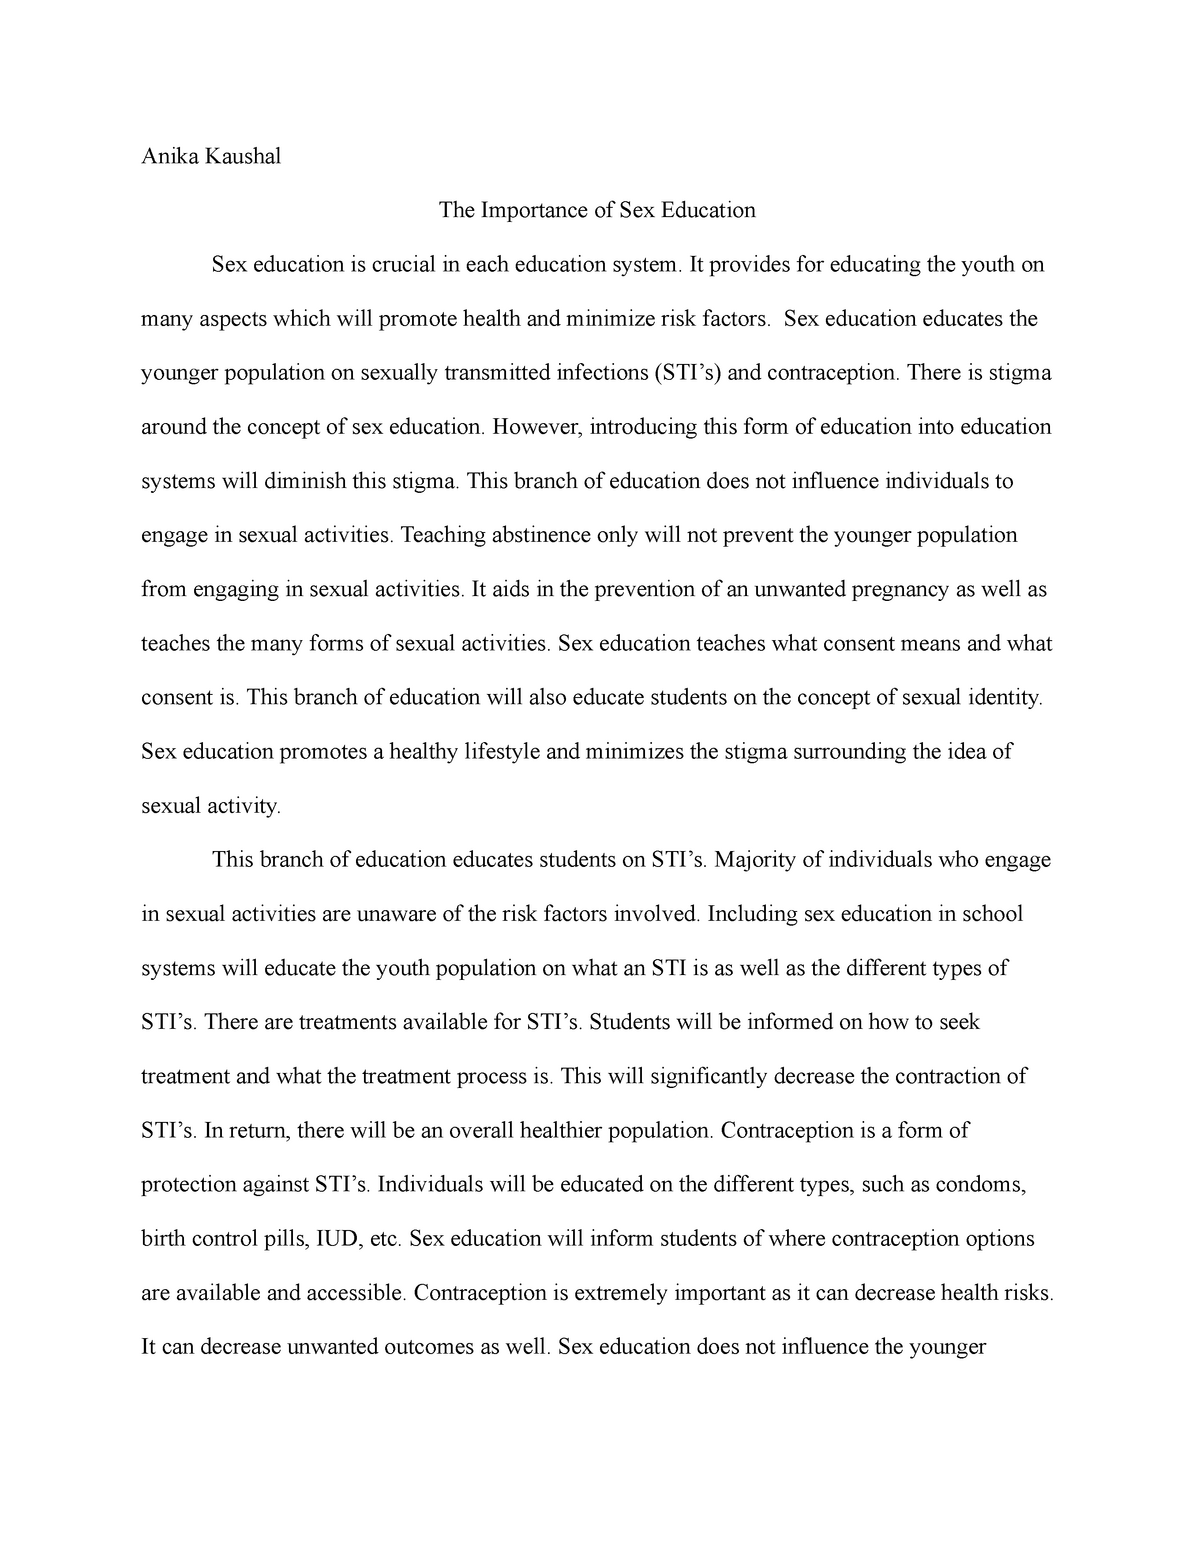 thesis statement on sex education